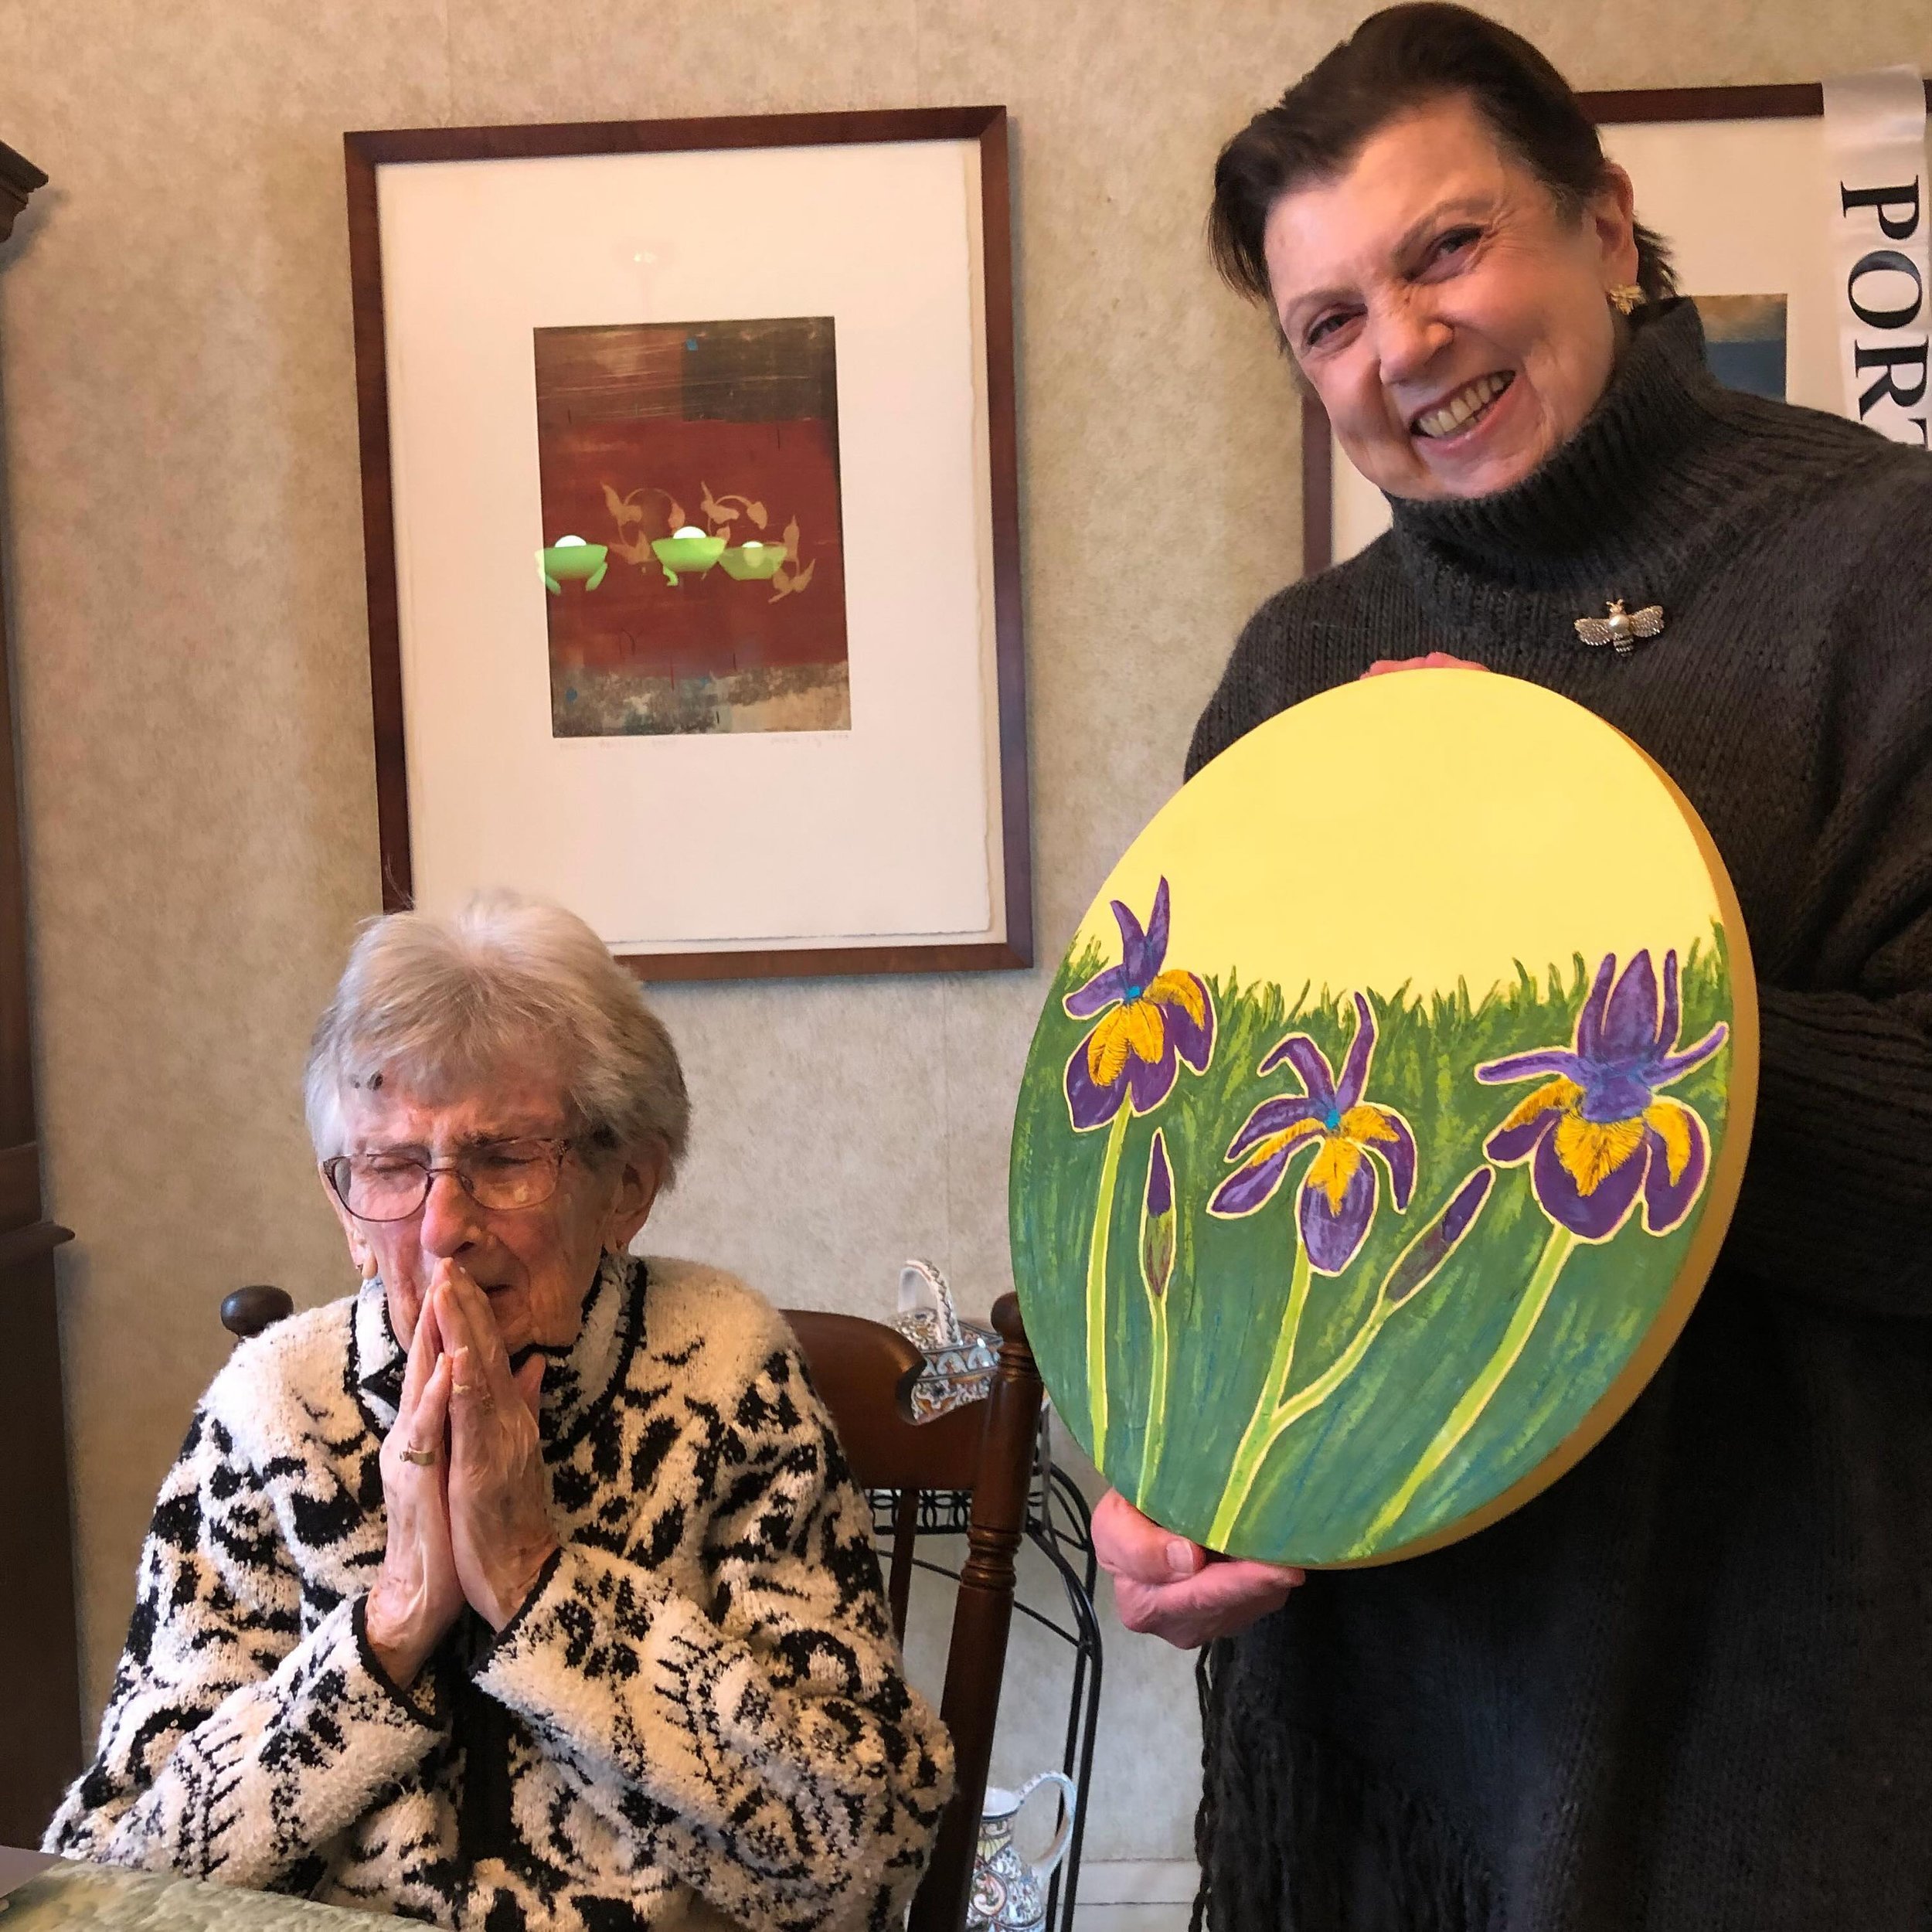 I can&rsquo;t tell you how happy this photo makes me!! I smile every time I look at it. My wonderful  collector Claire turned 96 this month, and her kids surprised her with this iris painting that she&rsquo;d been eyeing for a while. Seeing someone t